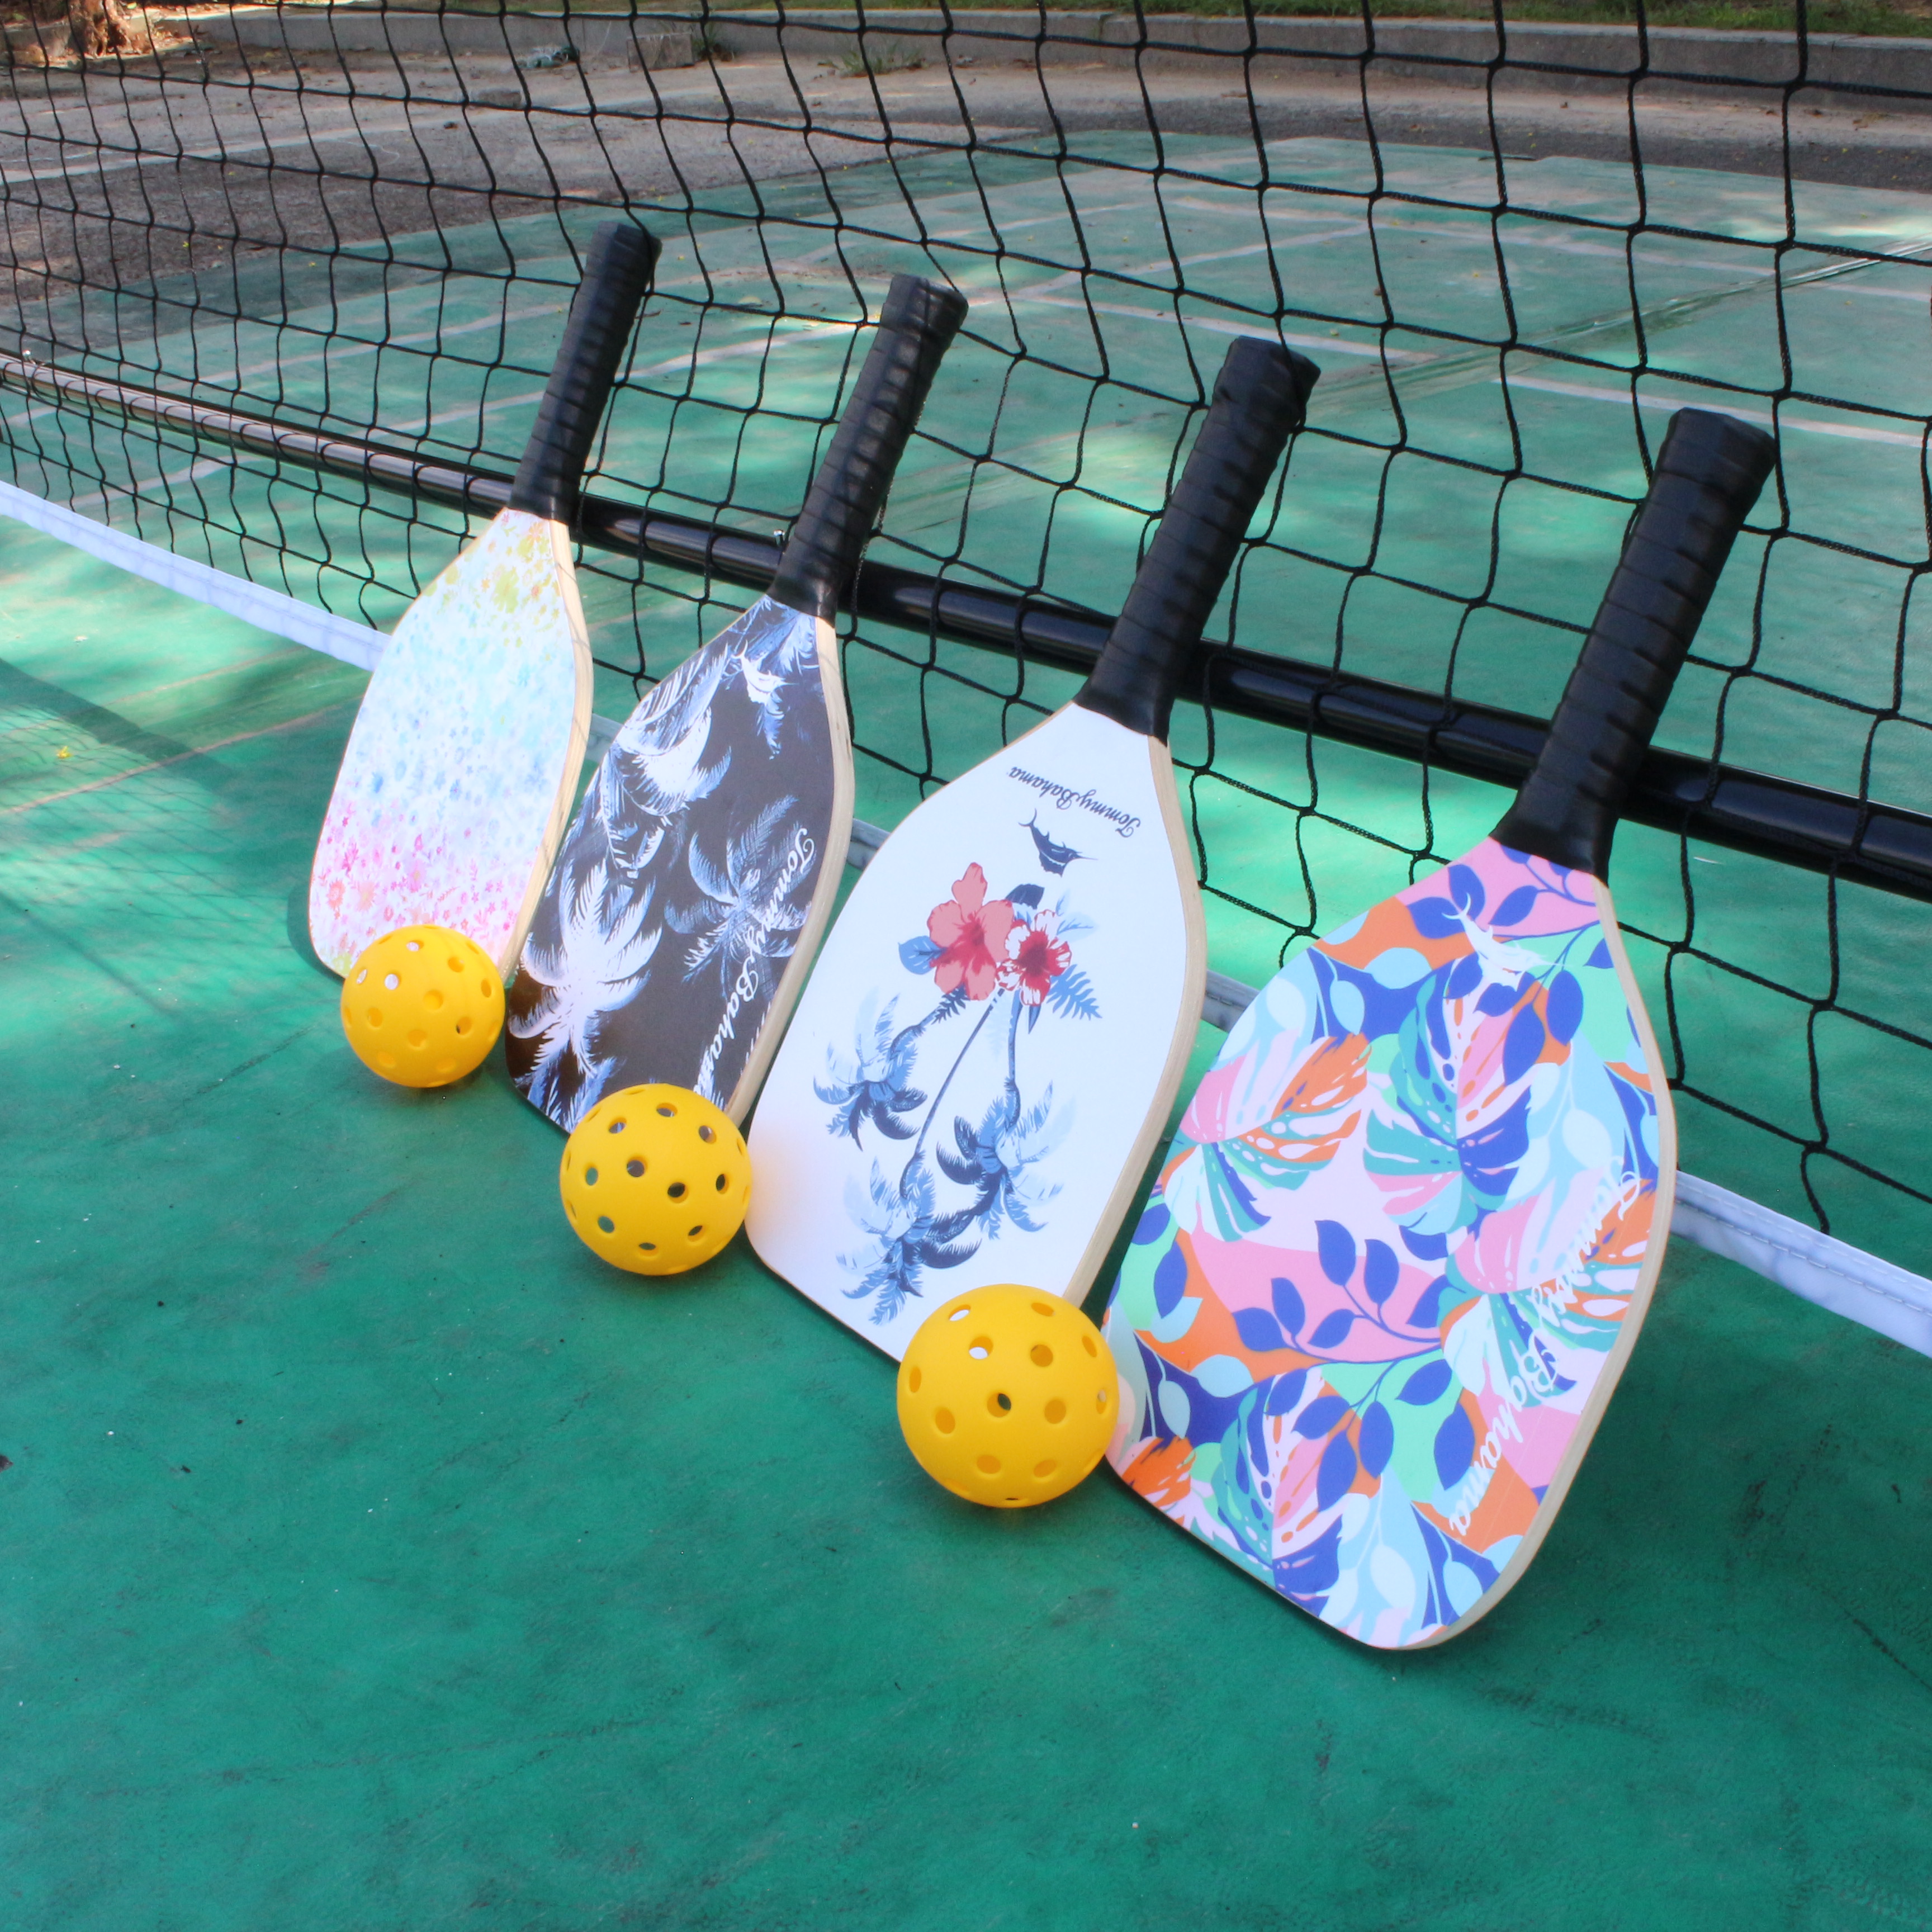 How much do you know about Pickleball, a new sport?.